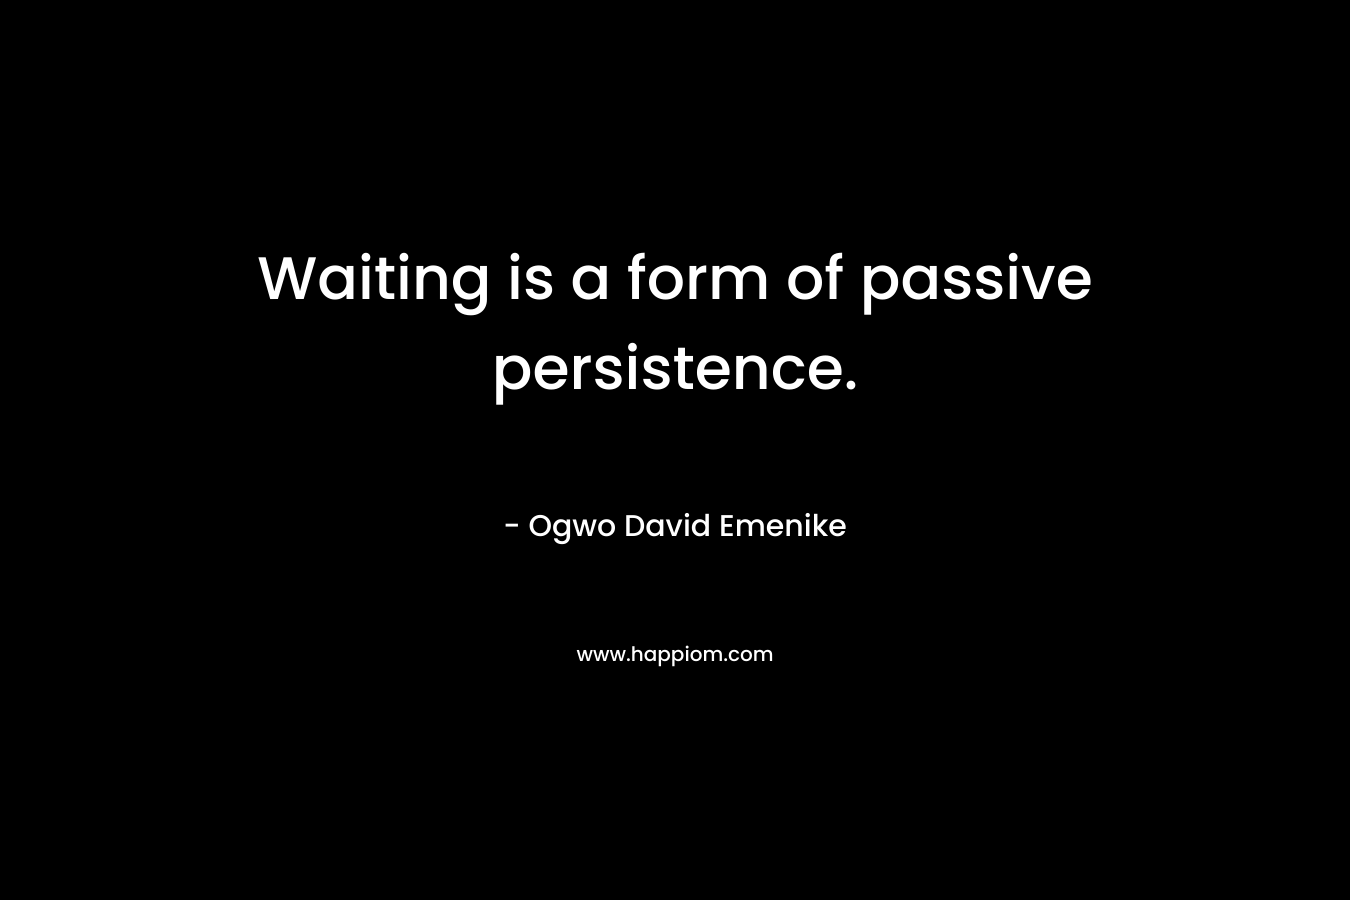 Waiting is a form of passive persistence.